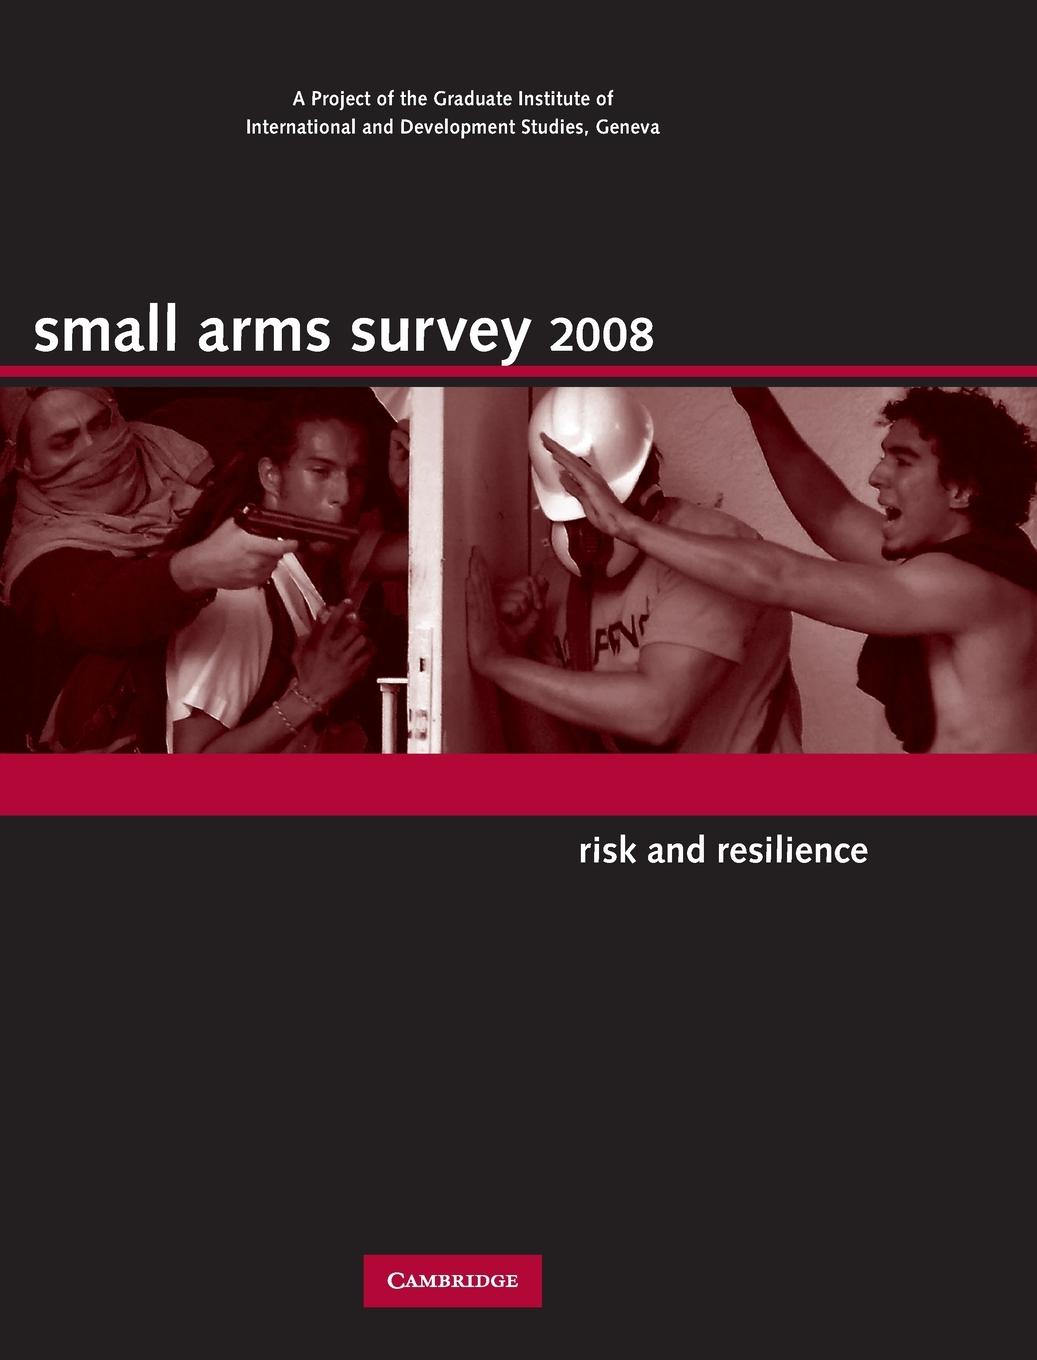 Small Arms Survey: Risk and Resilience - Small Arms Survey Geneva